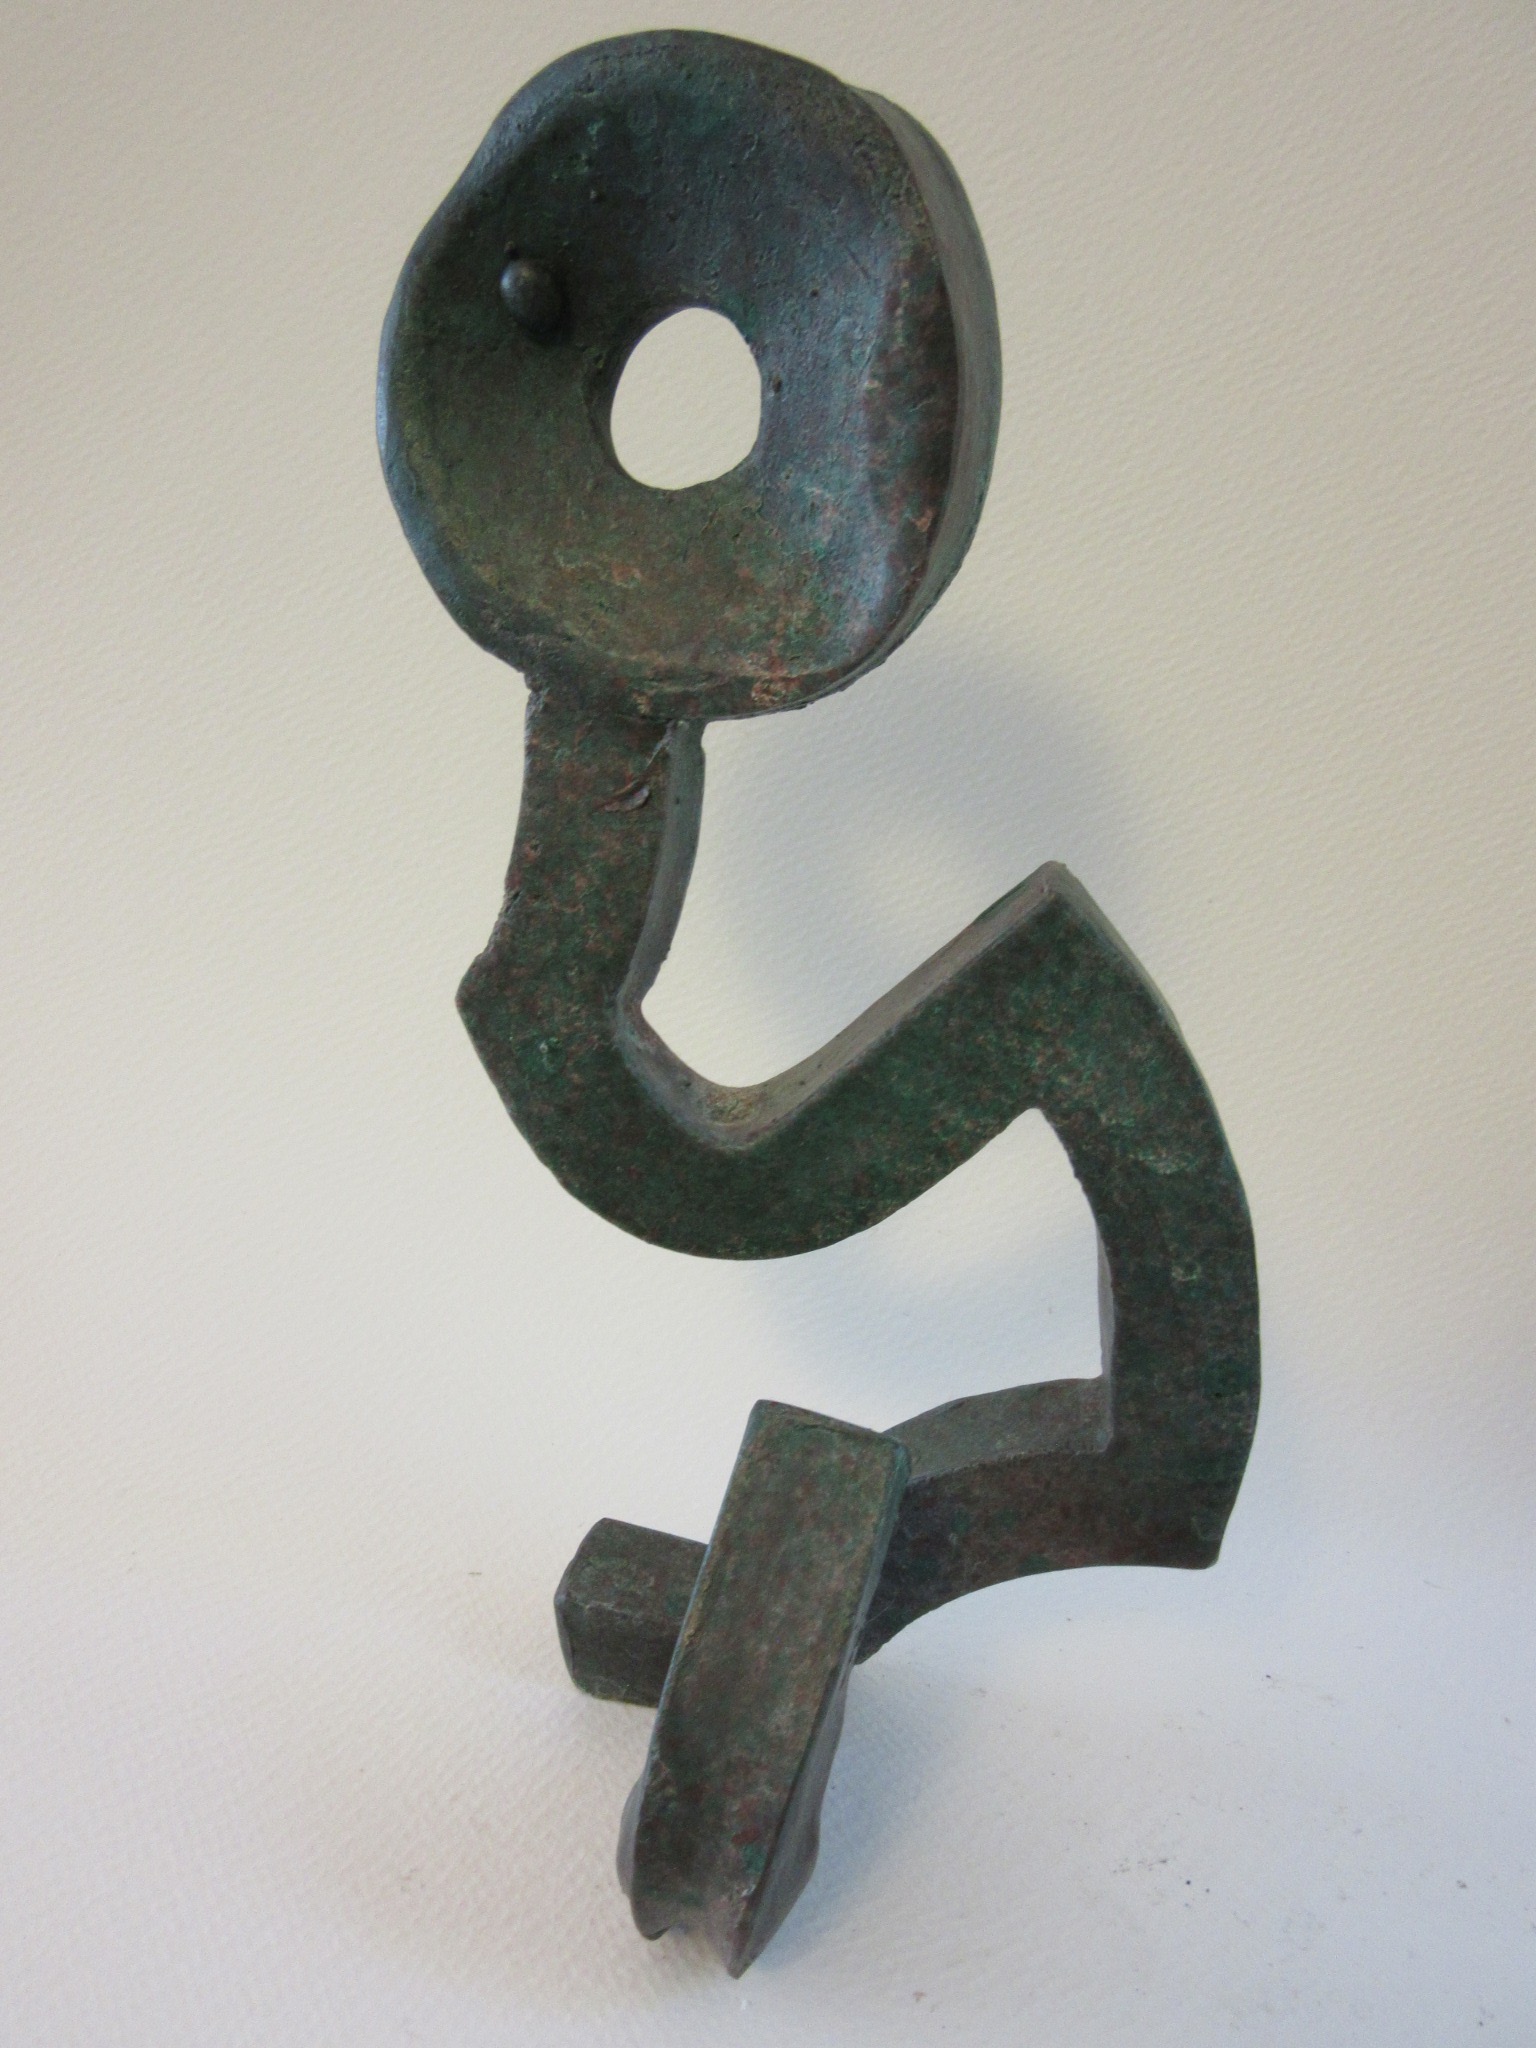   Untitled , bronze 9" x 4" Gifted 